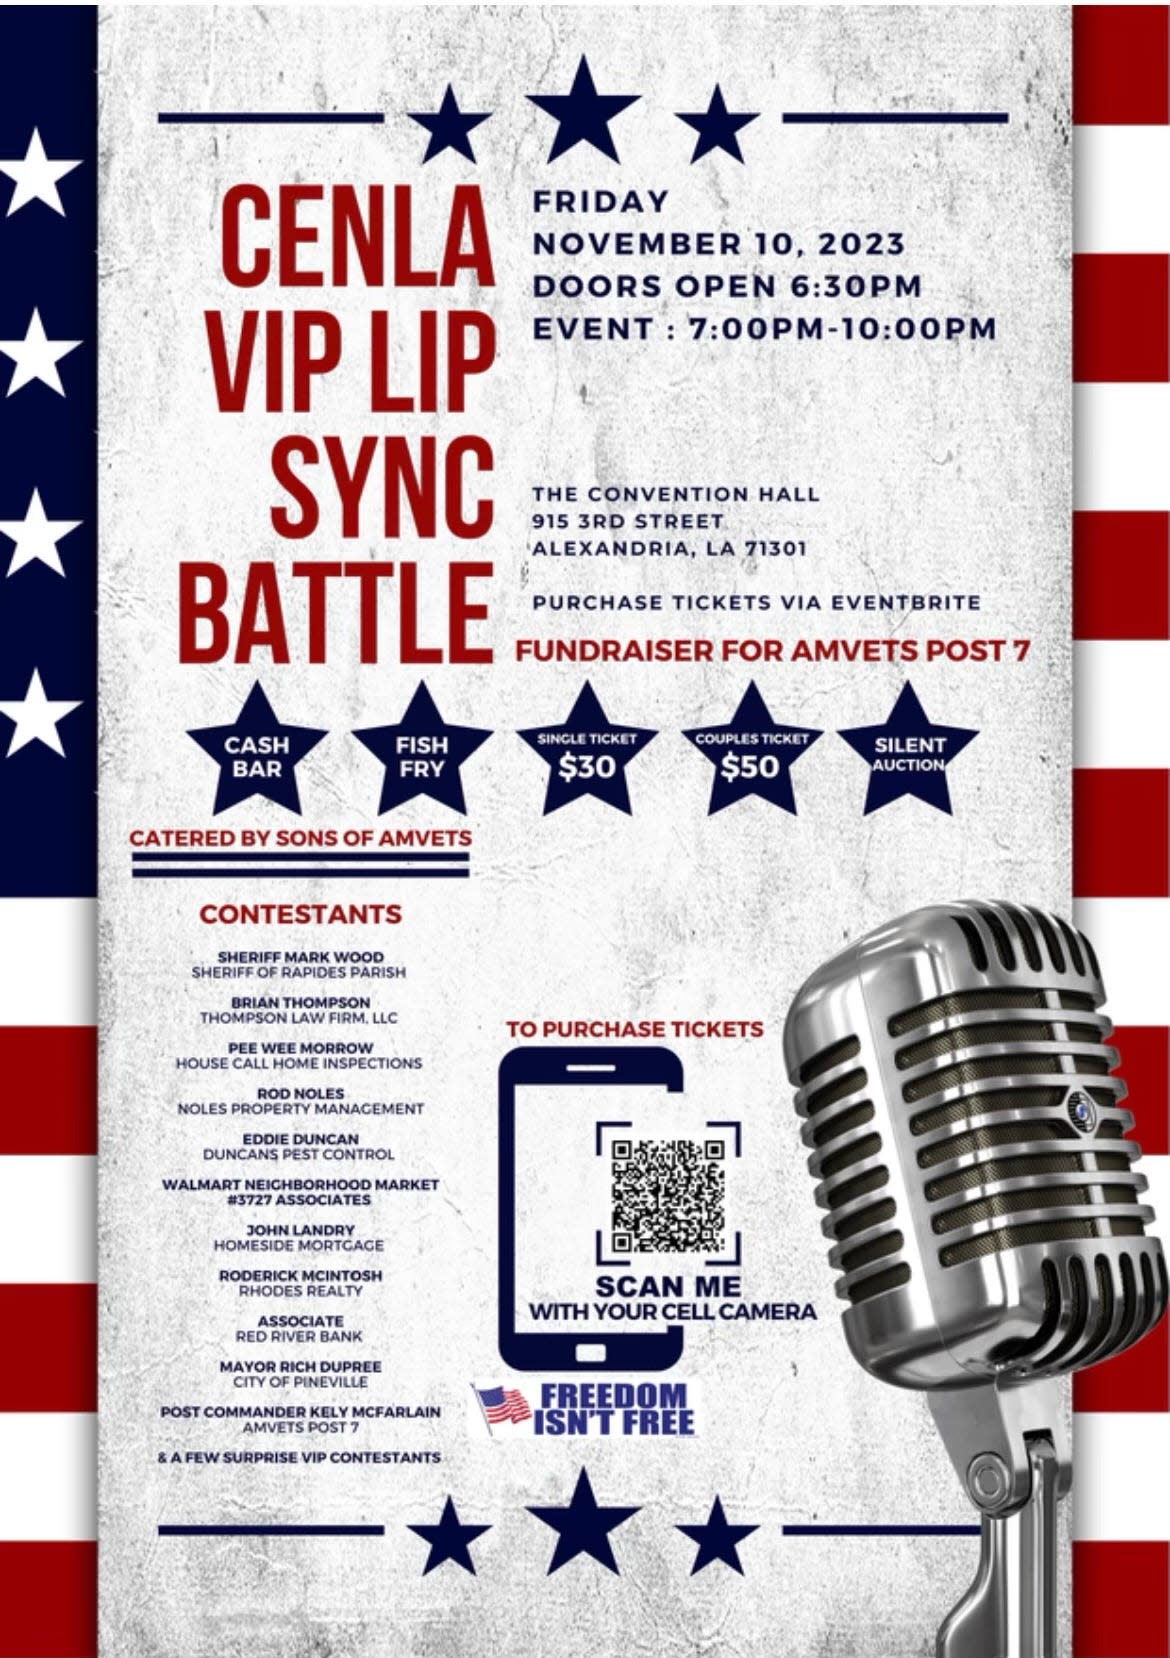 The Cenla VIP Lip Sync Battle set for next Friday, Nov. 10., will feature many locally known faces lip syncing to music of all genres.